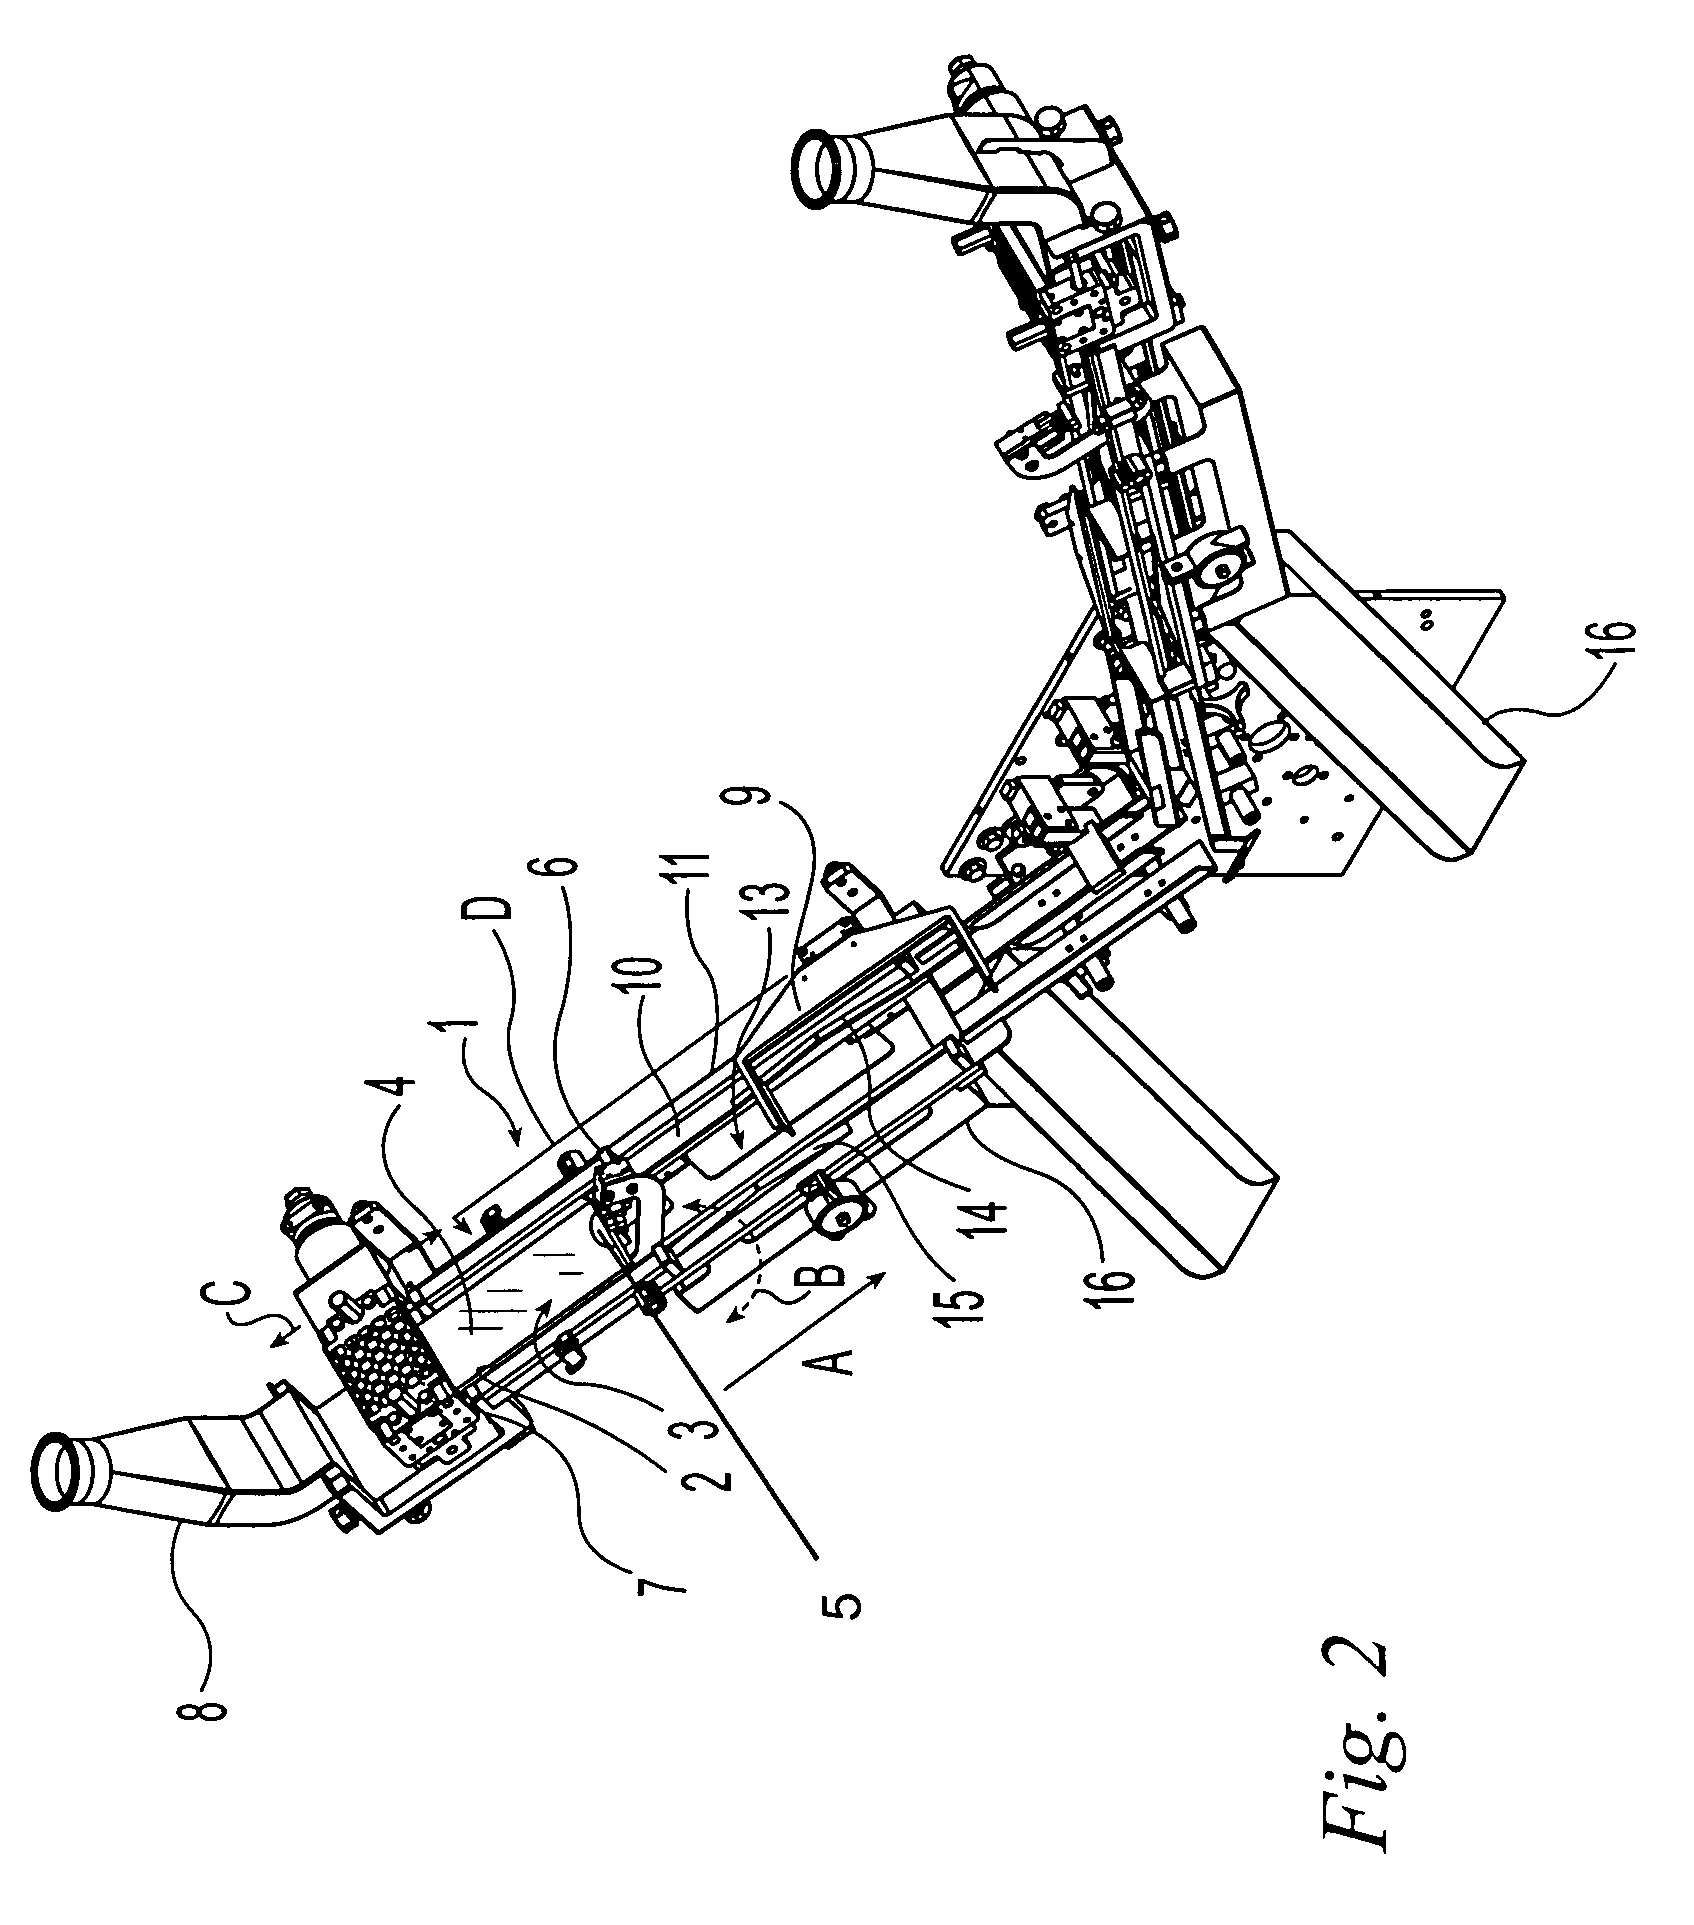 Apparatus for unwrapping and transporting frangible wafers for ice cream sandwiches and the like